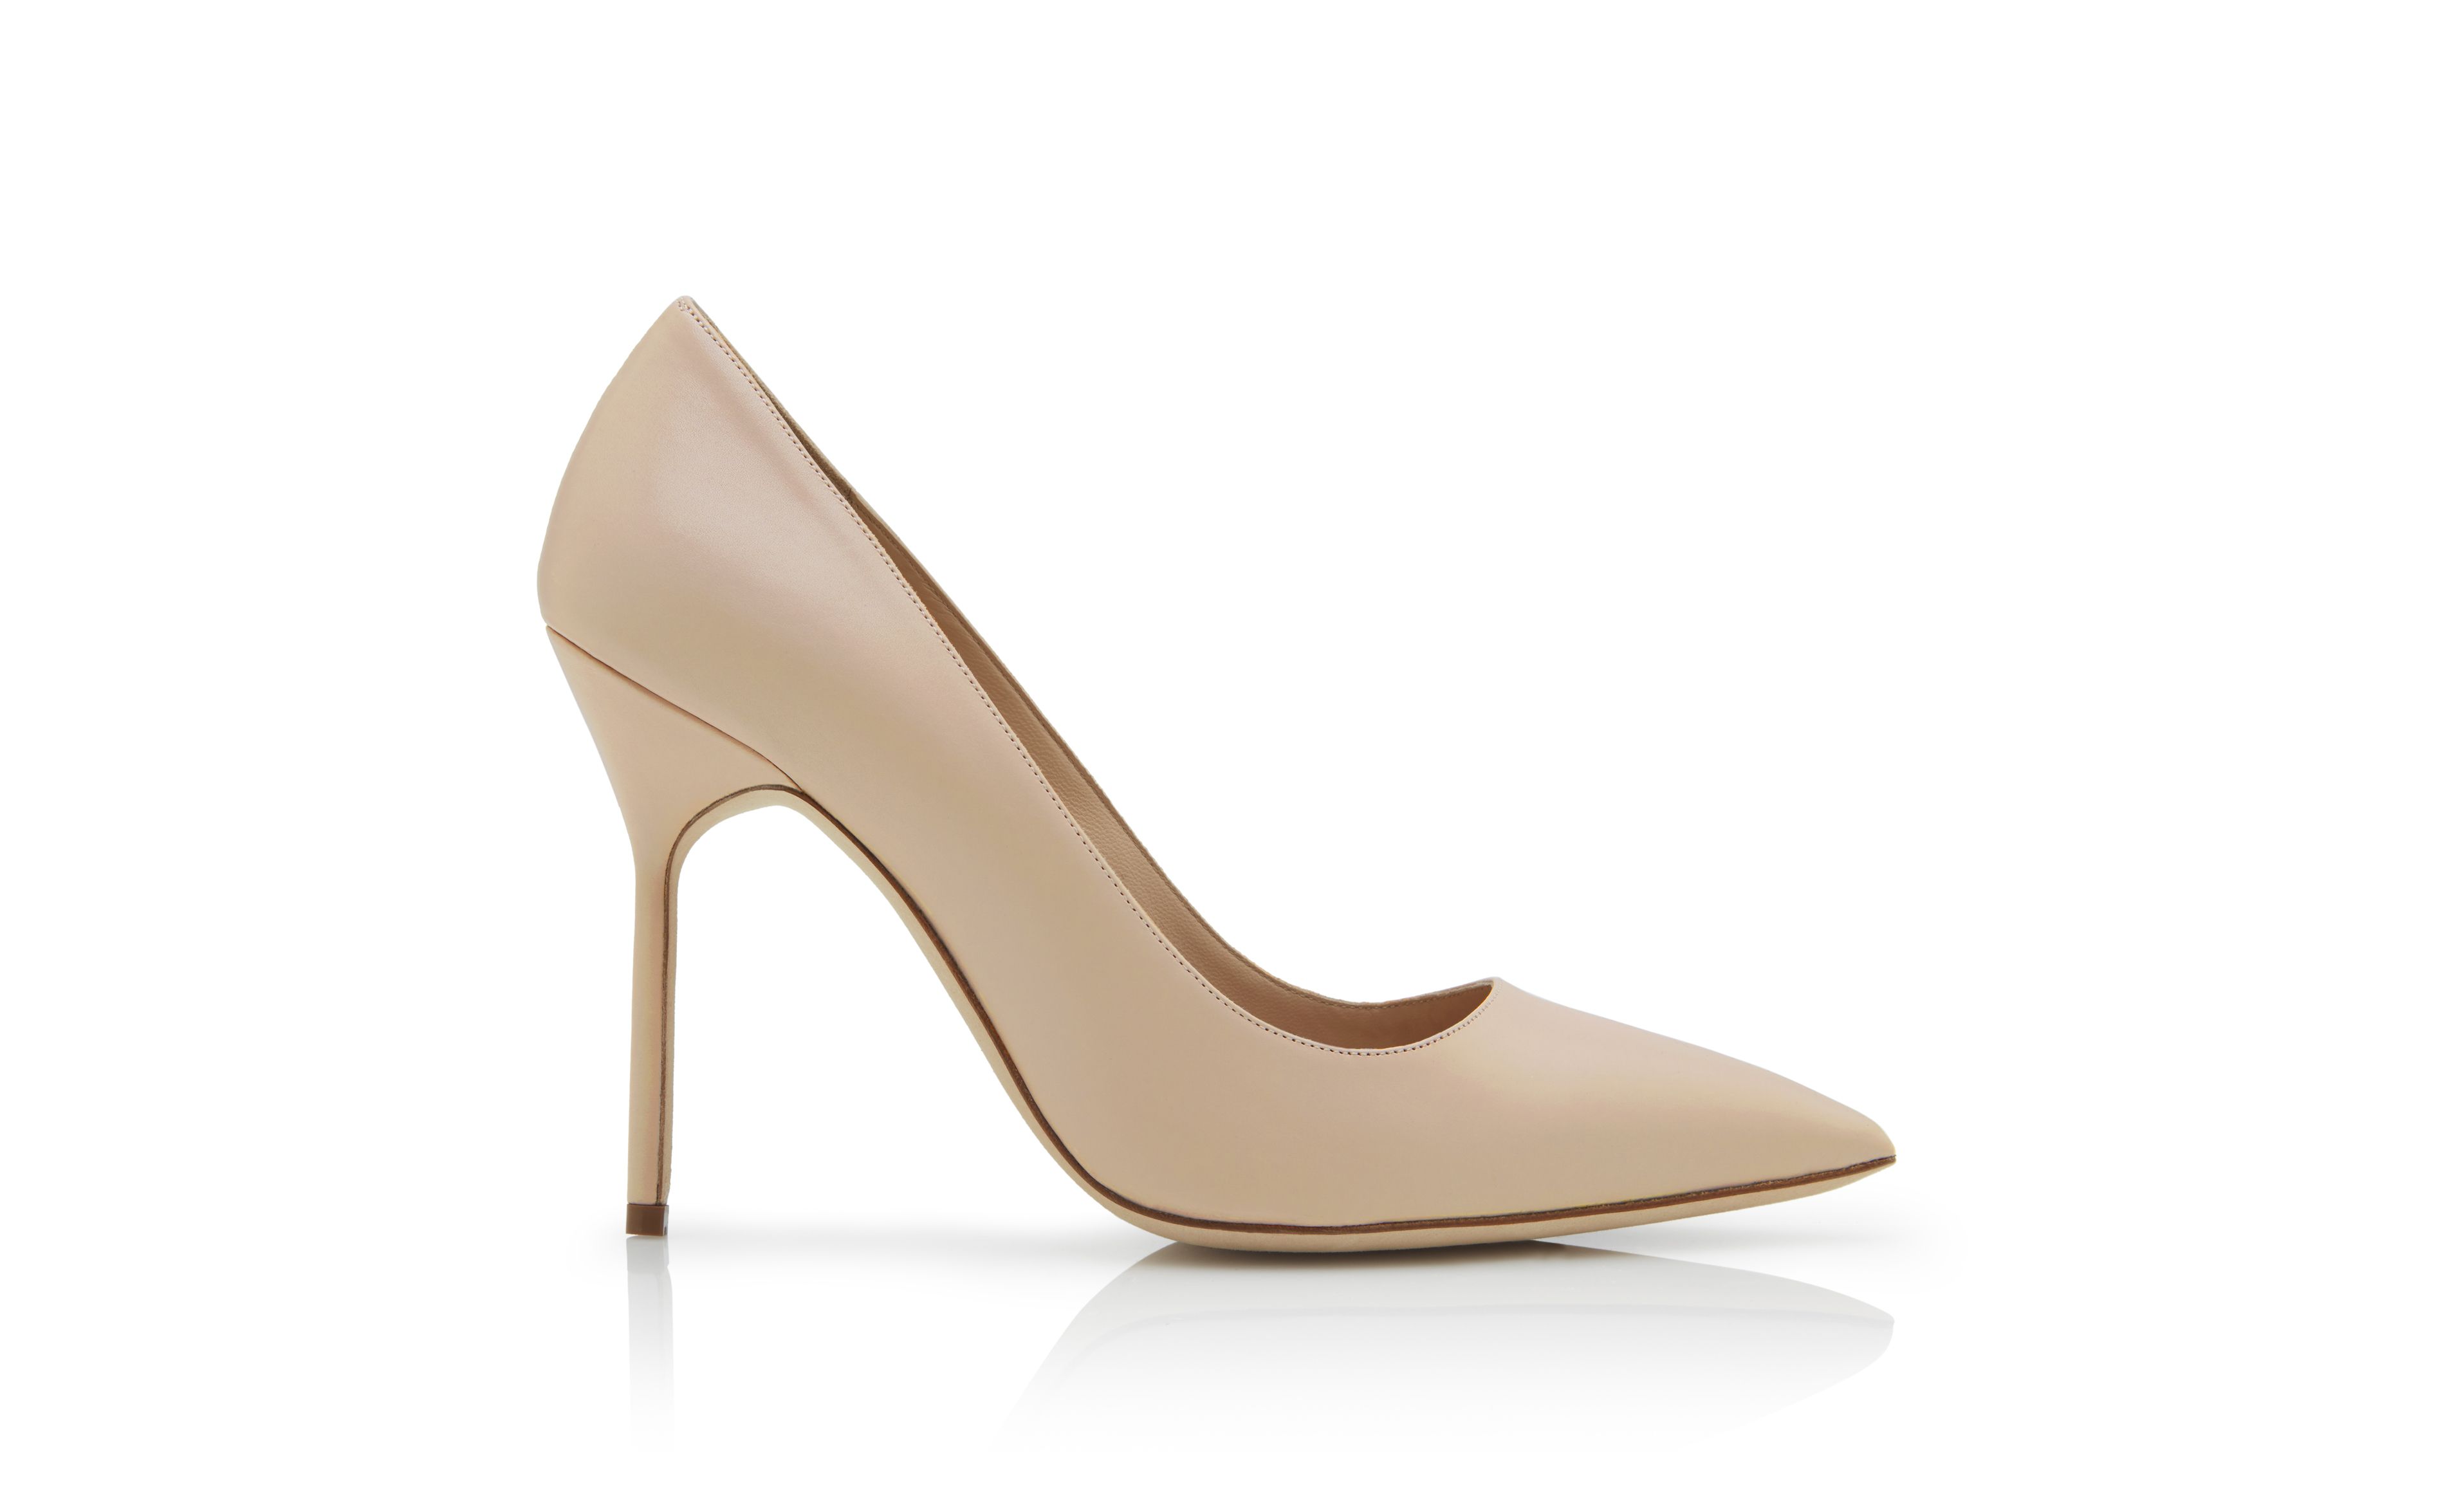 Designer Taupe Calf Leather Pointed Toe Pumps - Image Side View